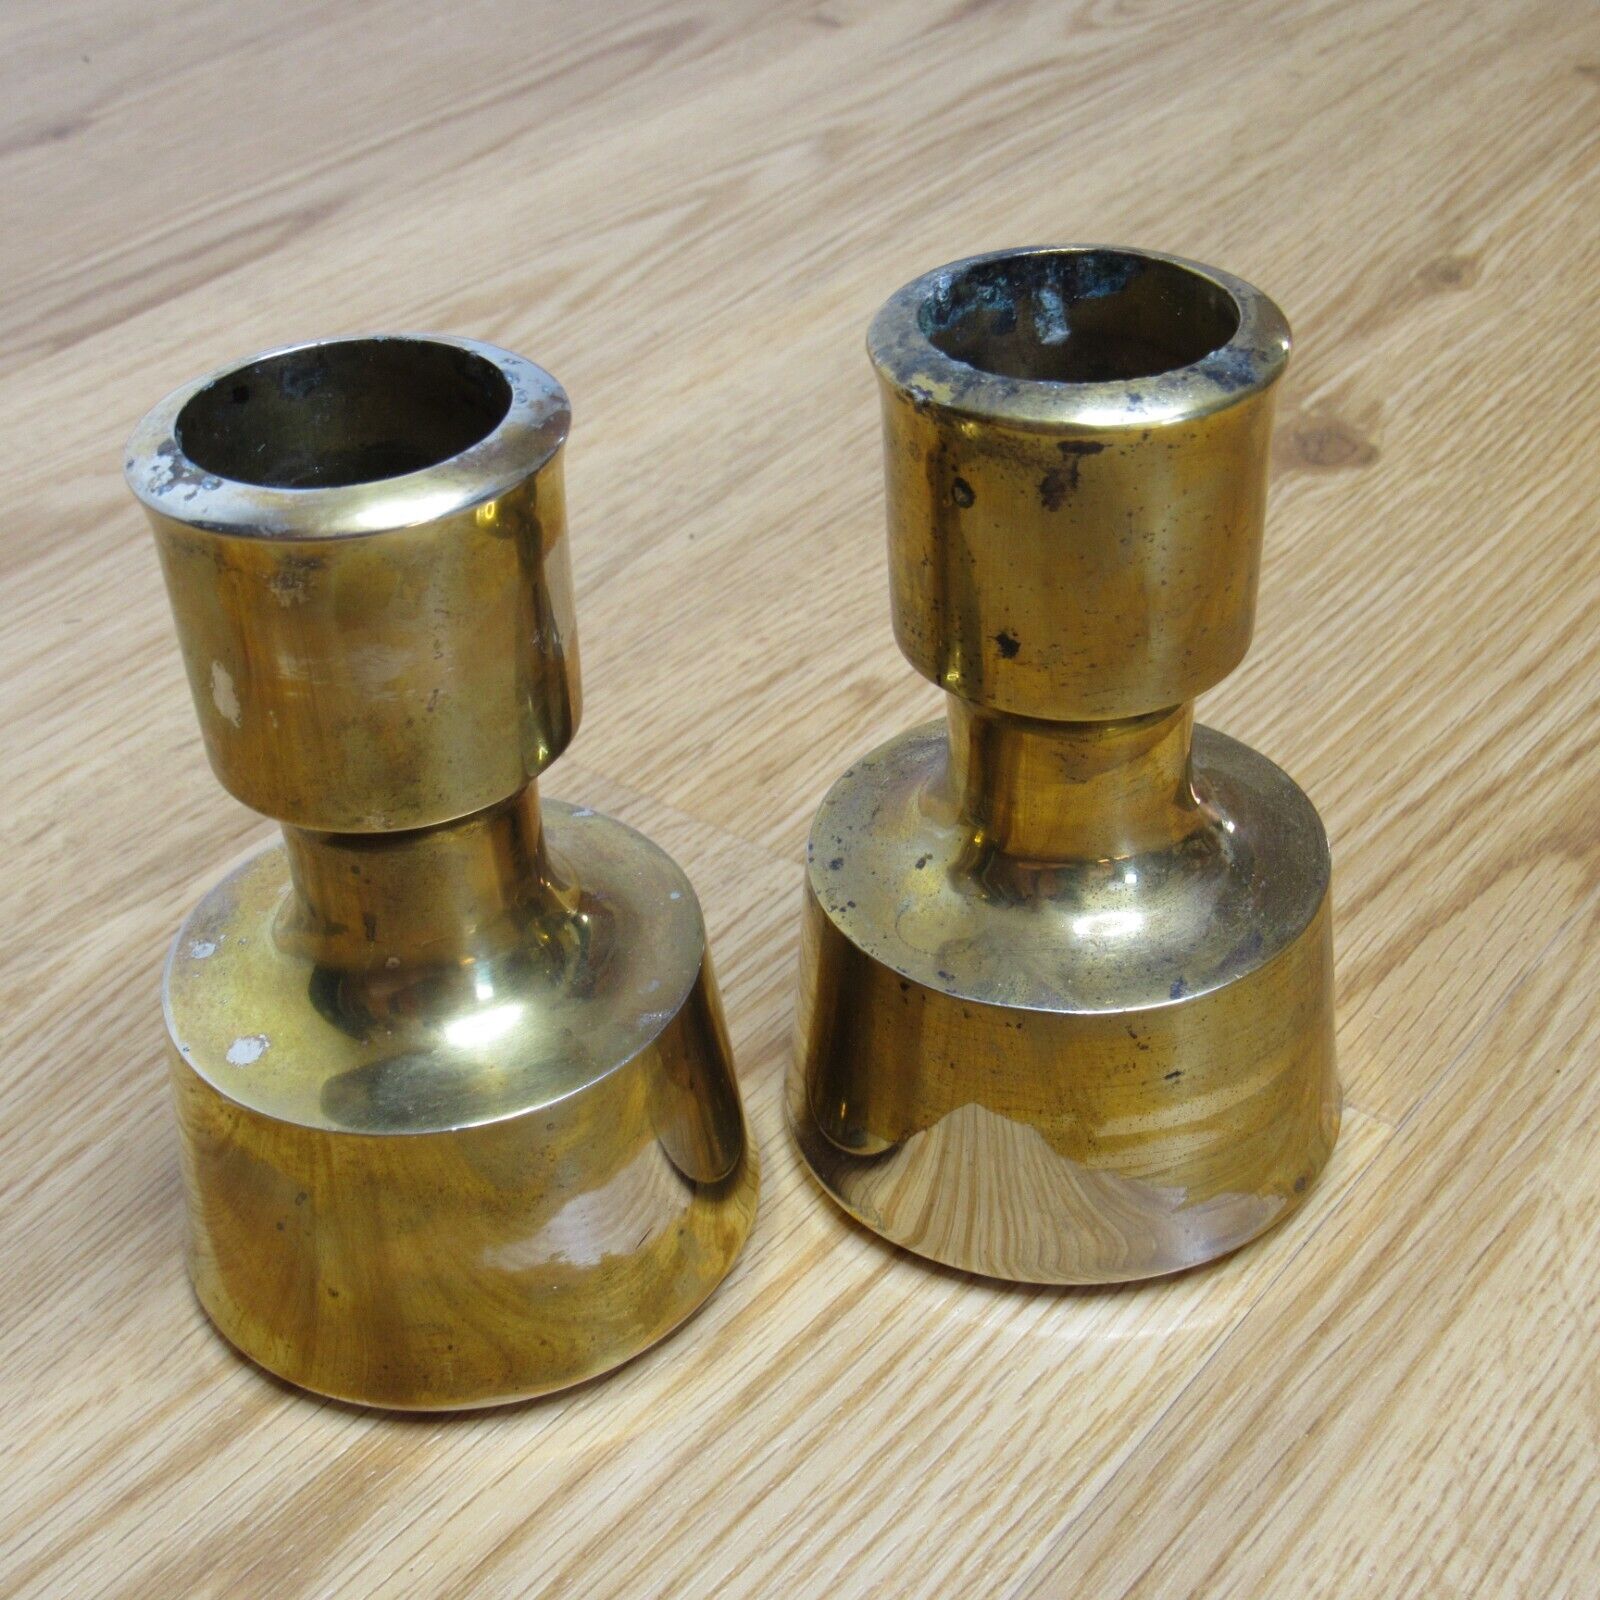 Pair of Vintage Dansk Brass Candle Holders by Jens Quistgaard, Wear to Finish